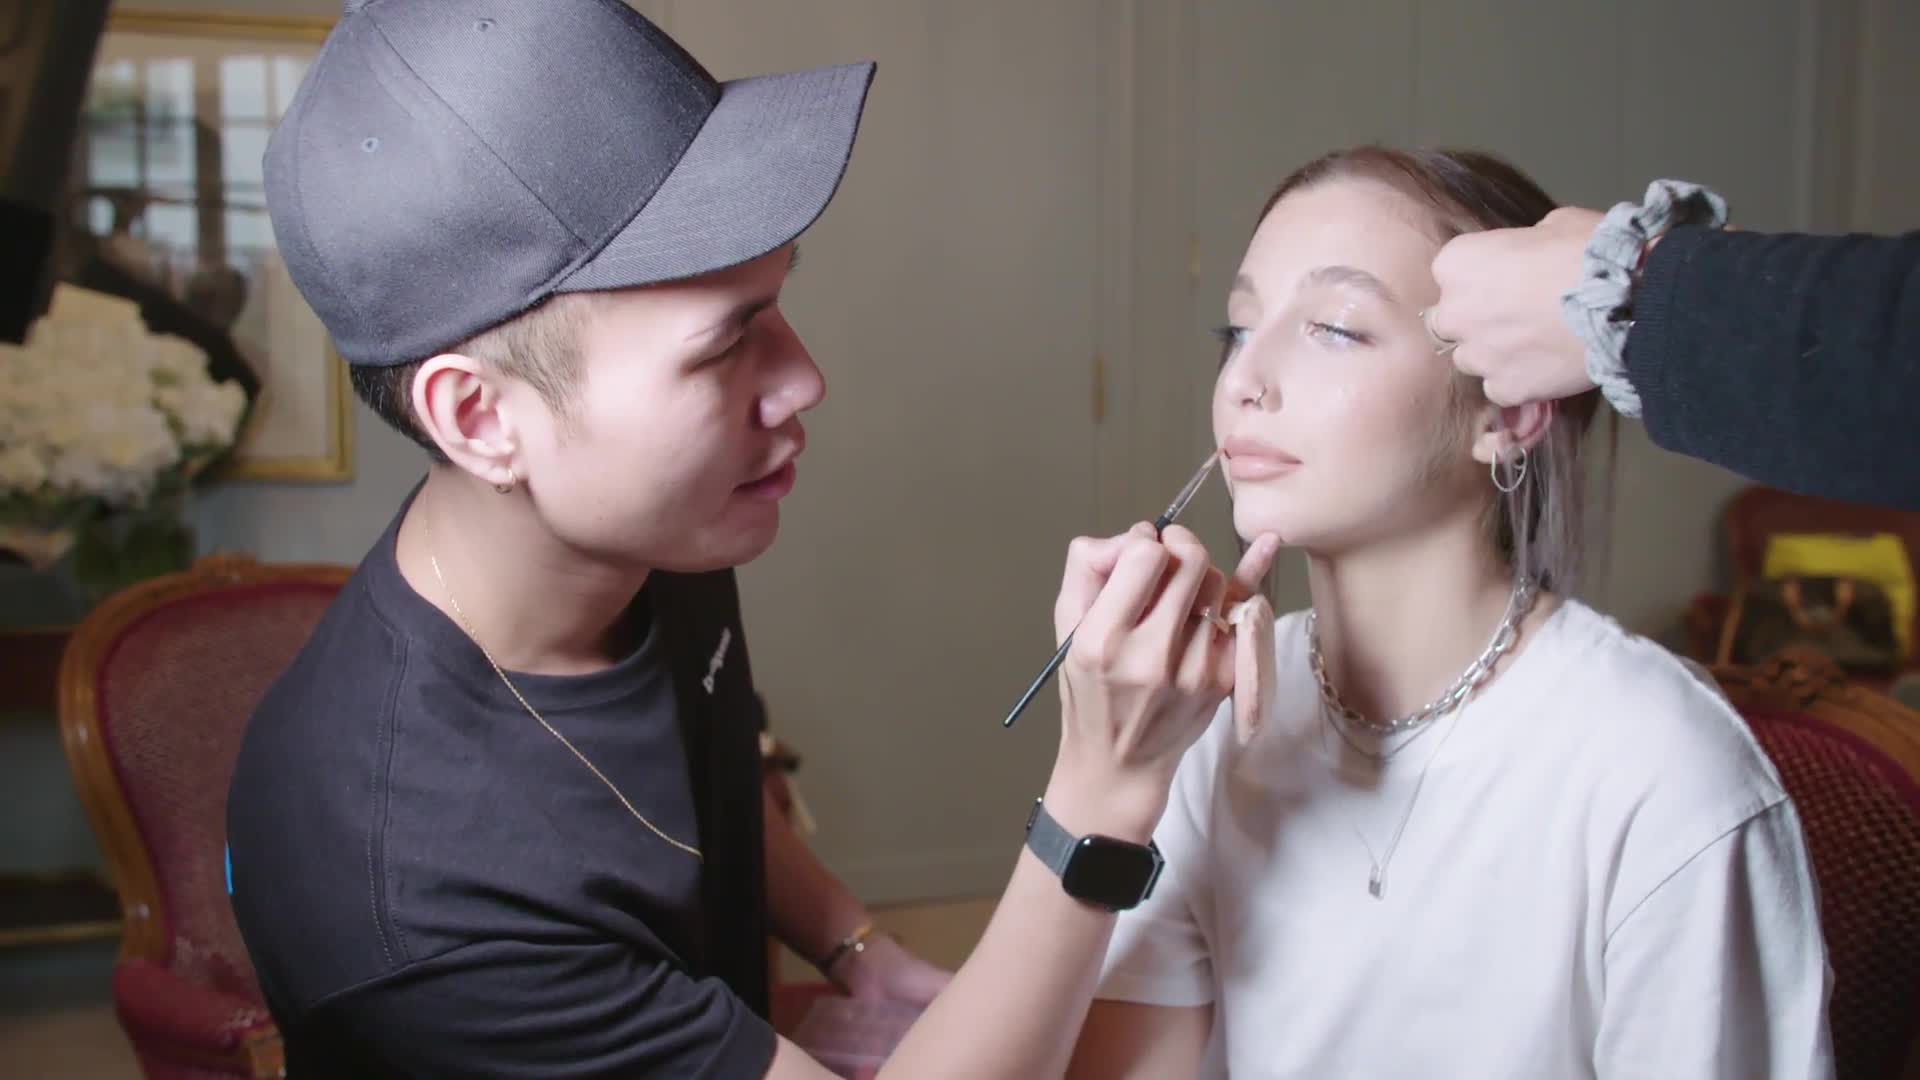 Watch Watch r Emma Chamberlain Get Ready for the Louis Vuitton Show, Getting Ready with Vogue